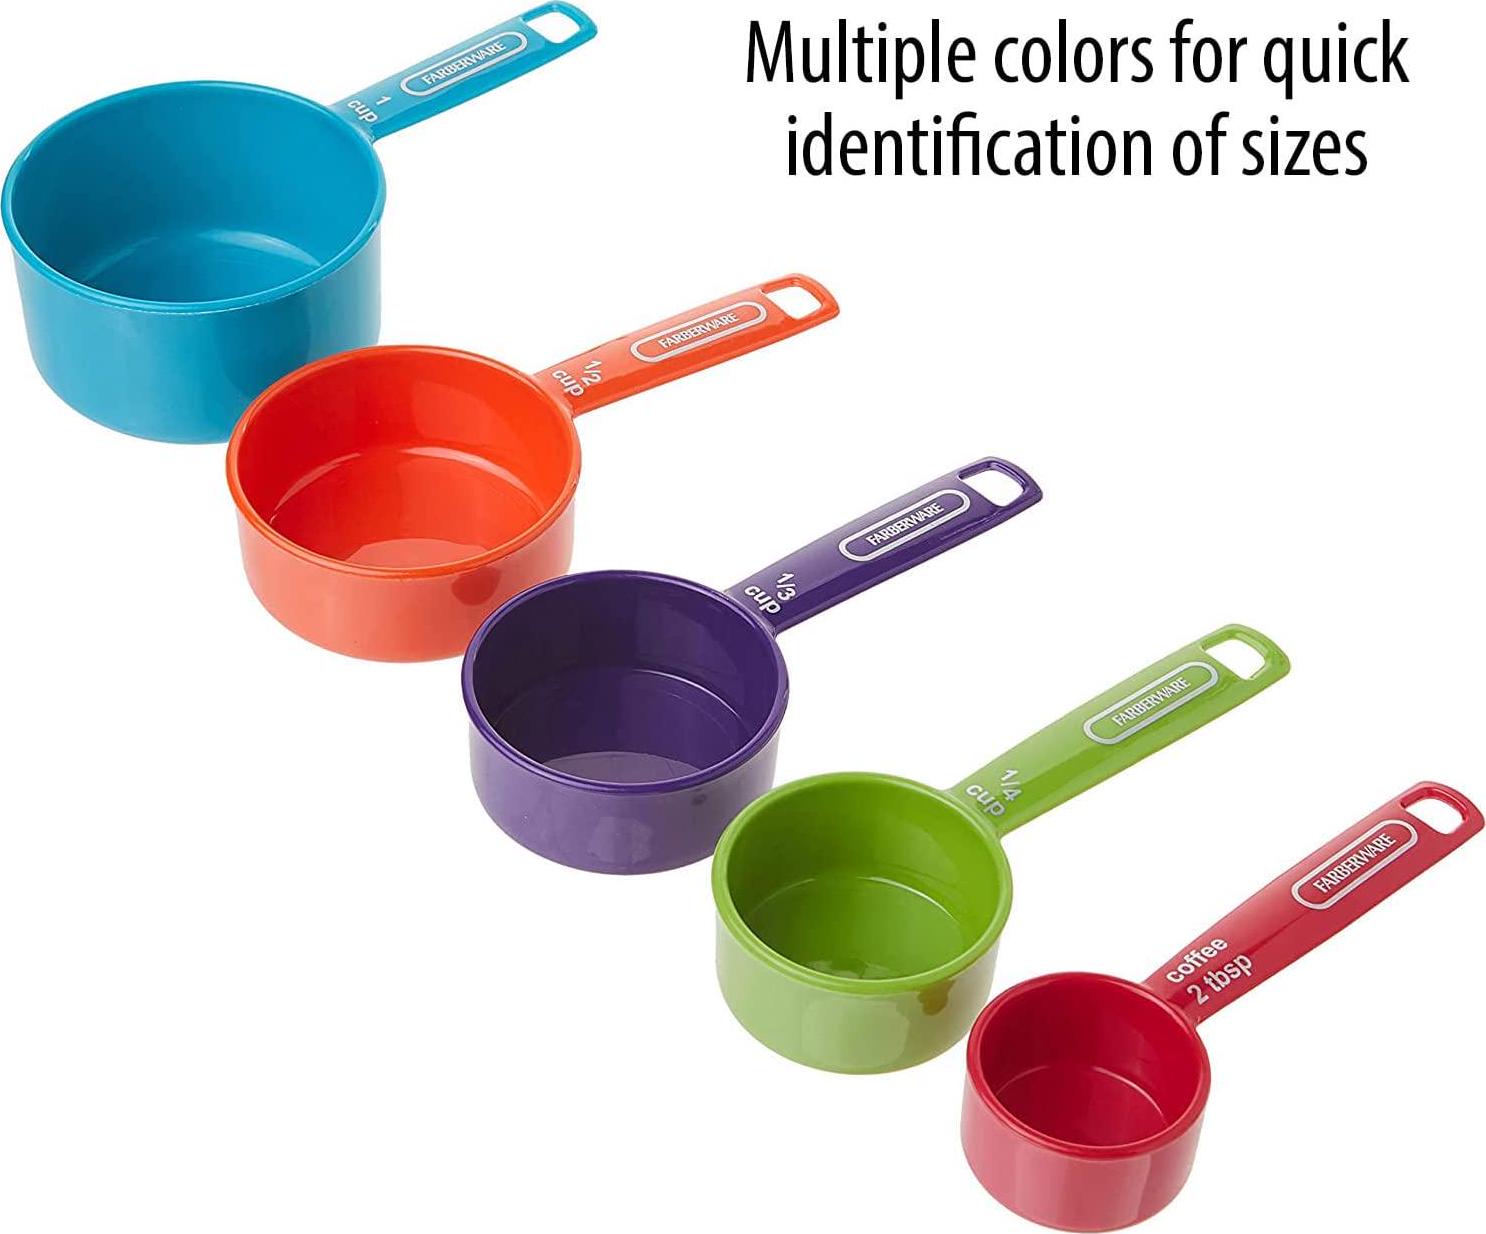 Farberware, Farberware 5216439 Professional Plastic Measuring Cups with Coffee Spoon, Set of 5, Assorted Colors